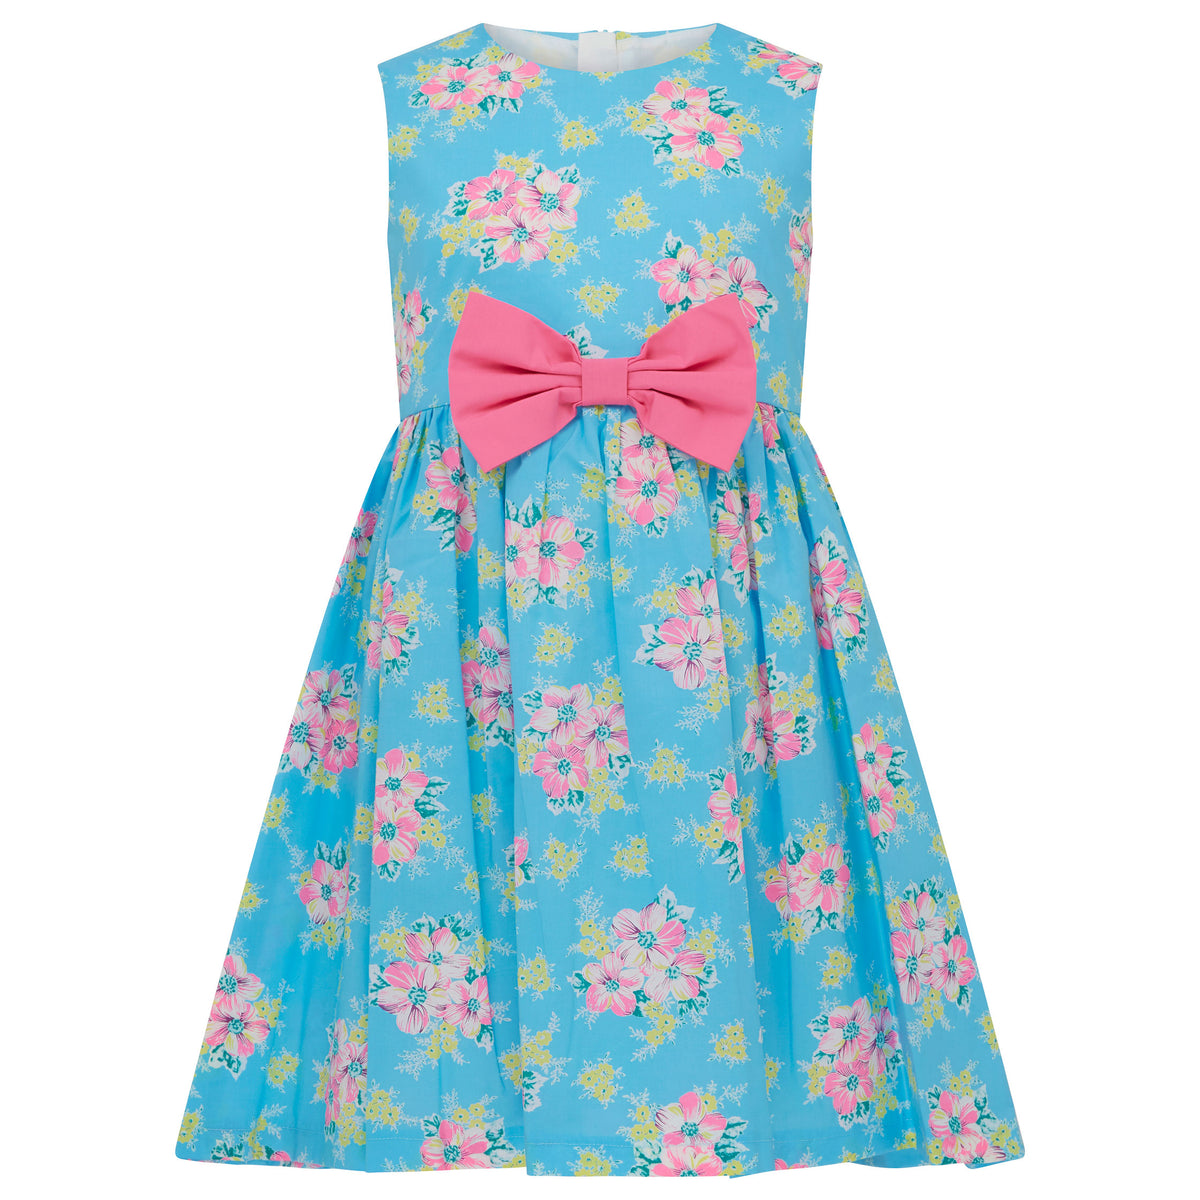 Taylor Floral Print Girls Cotton Dress Blue & Pink | Holly Hastie London